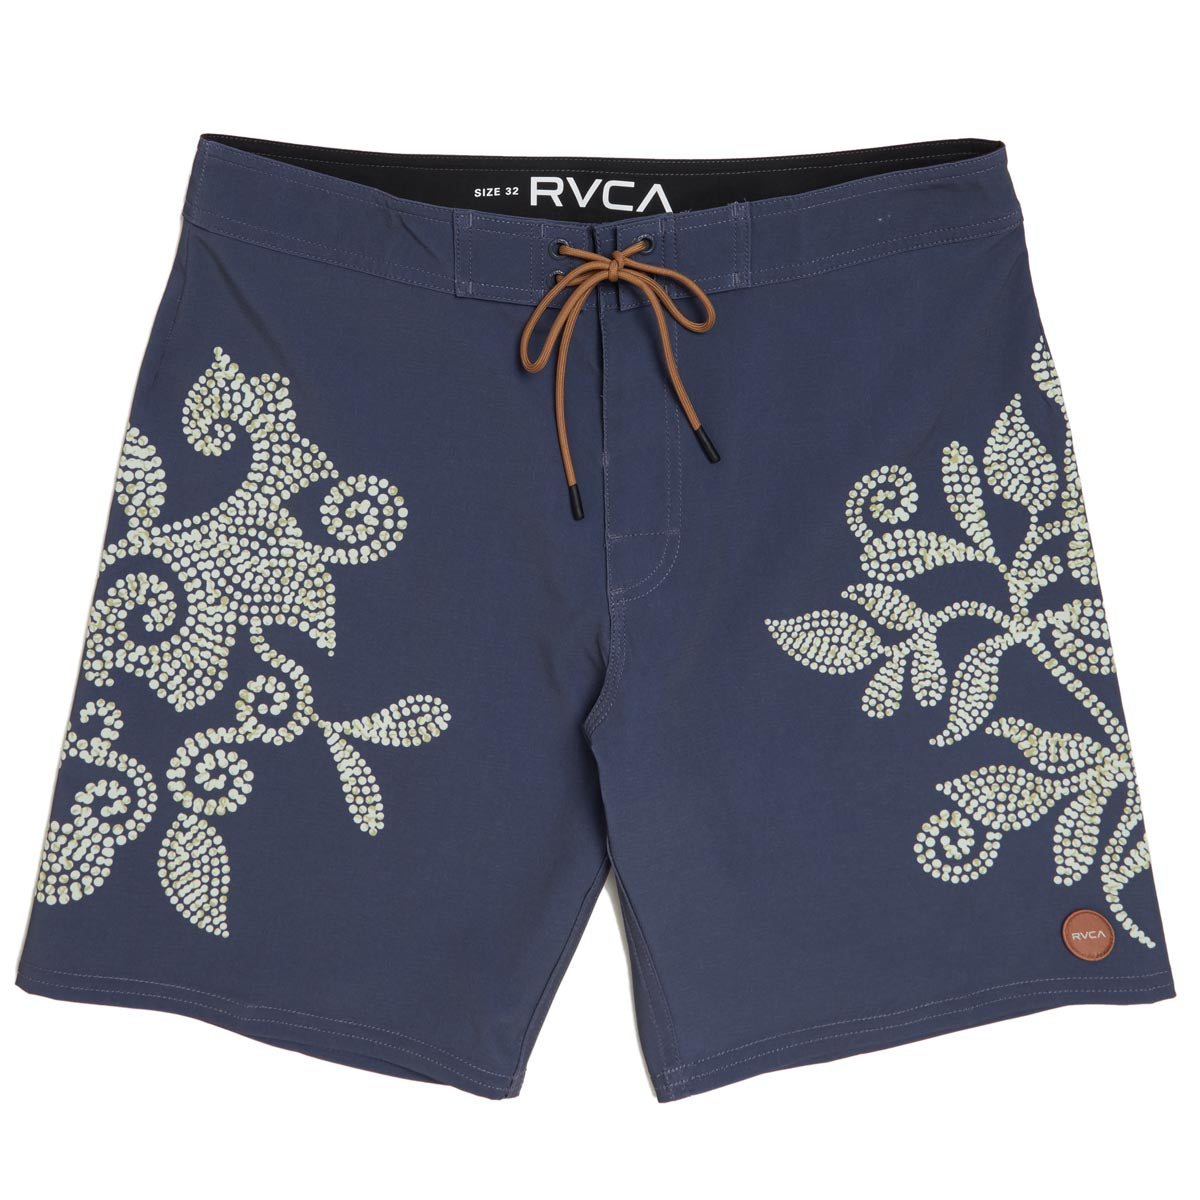 RVCA Displaced Board Shorts - Moody Blue image 1